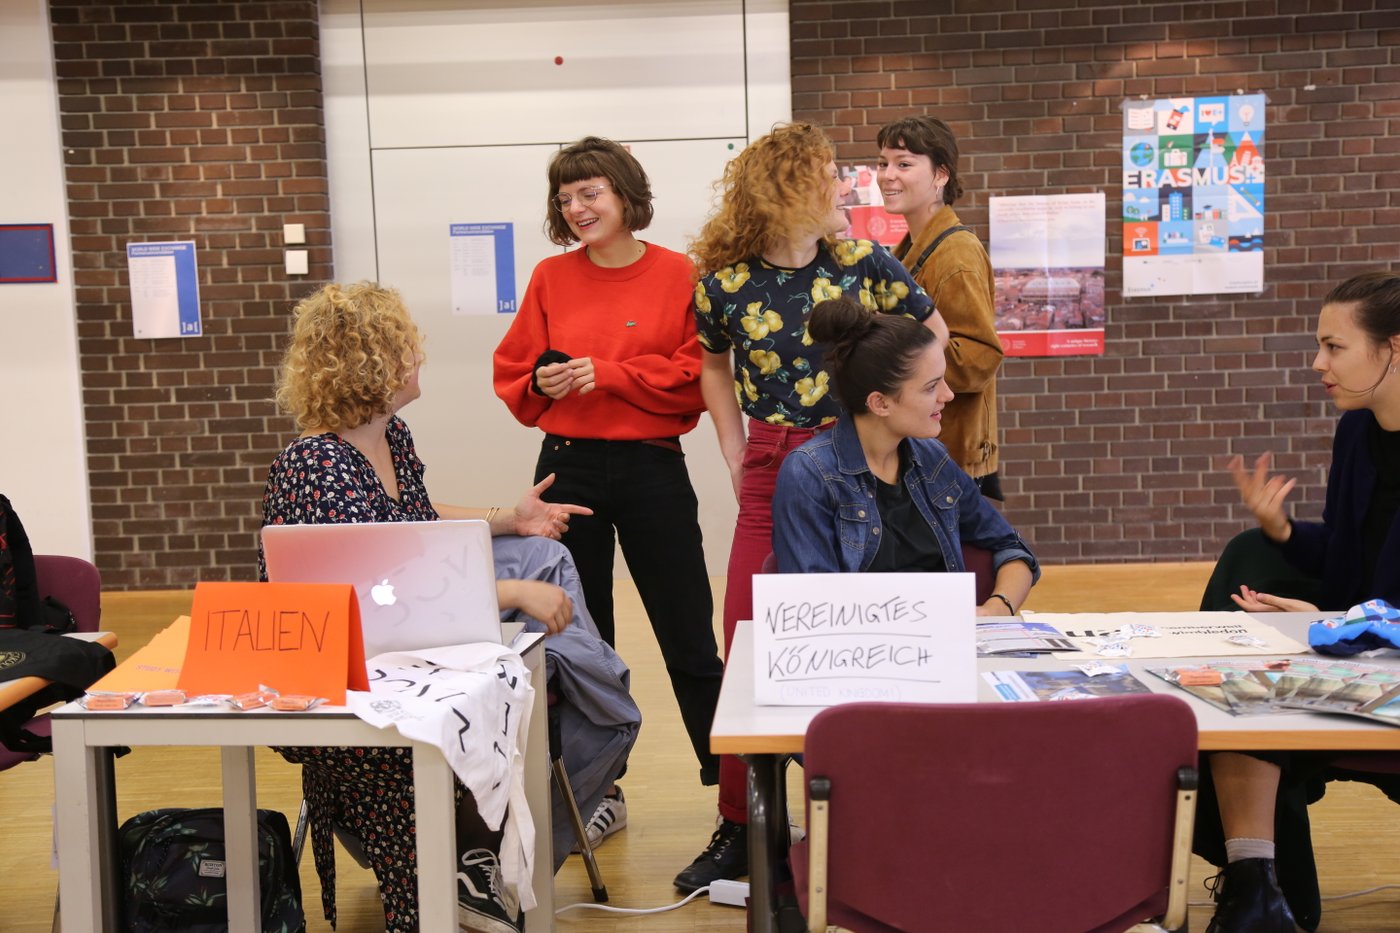 You can see incoming exchange students from Italy and the United Kingdom in lively conversation with students interested in studying abroad. A poster on the back wall draws attention to the Erasmus plus mobility program.